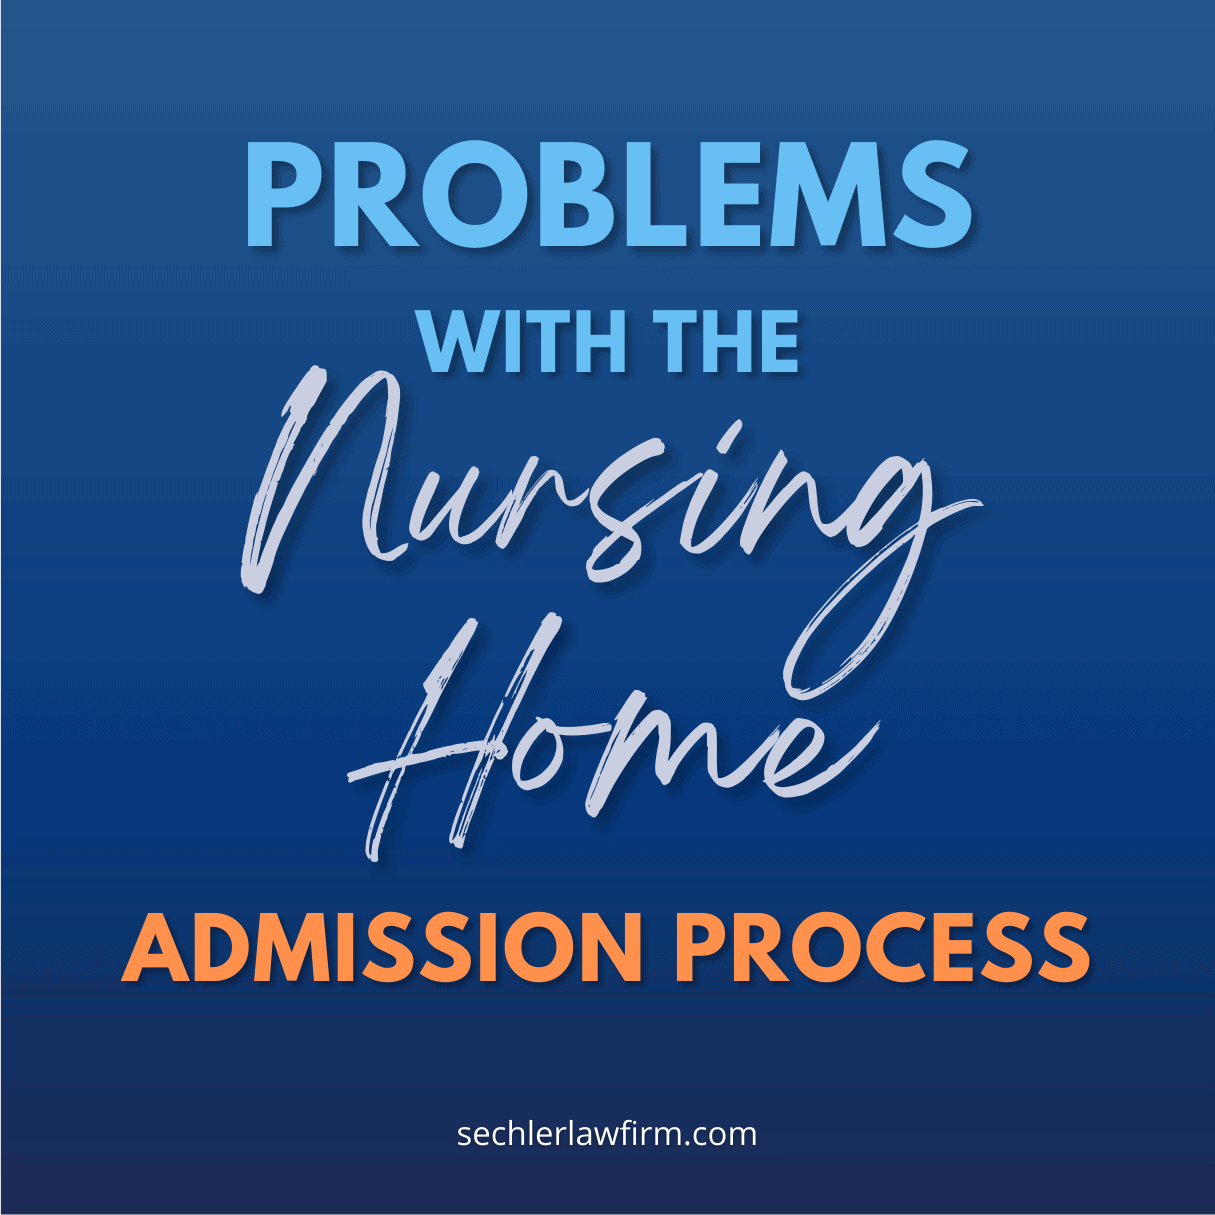 Problems with the Nursing Home Admission Process